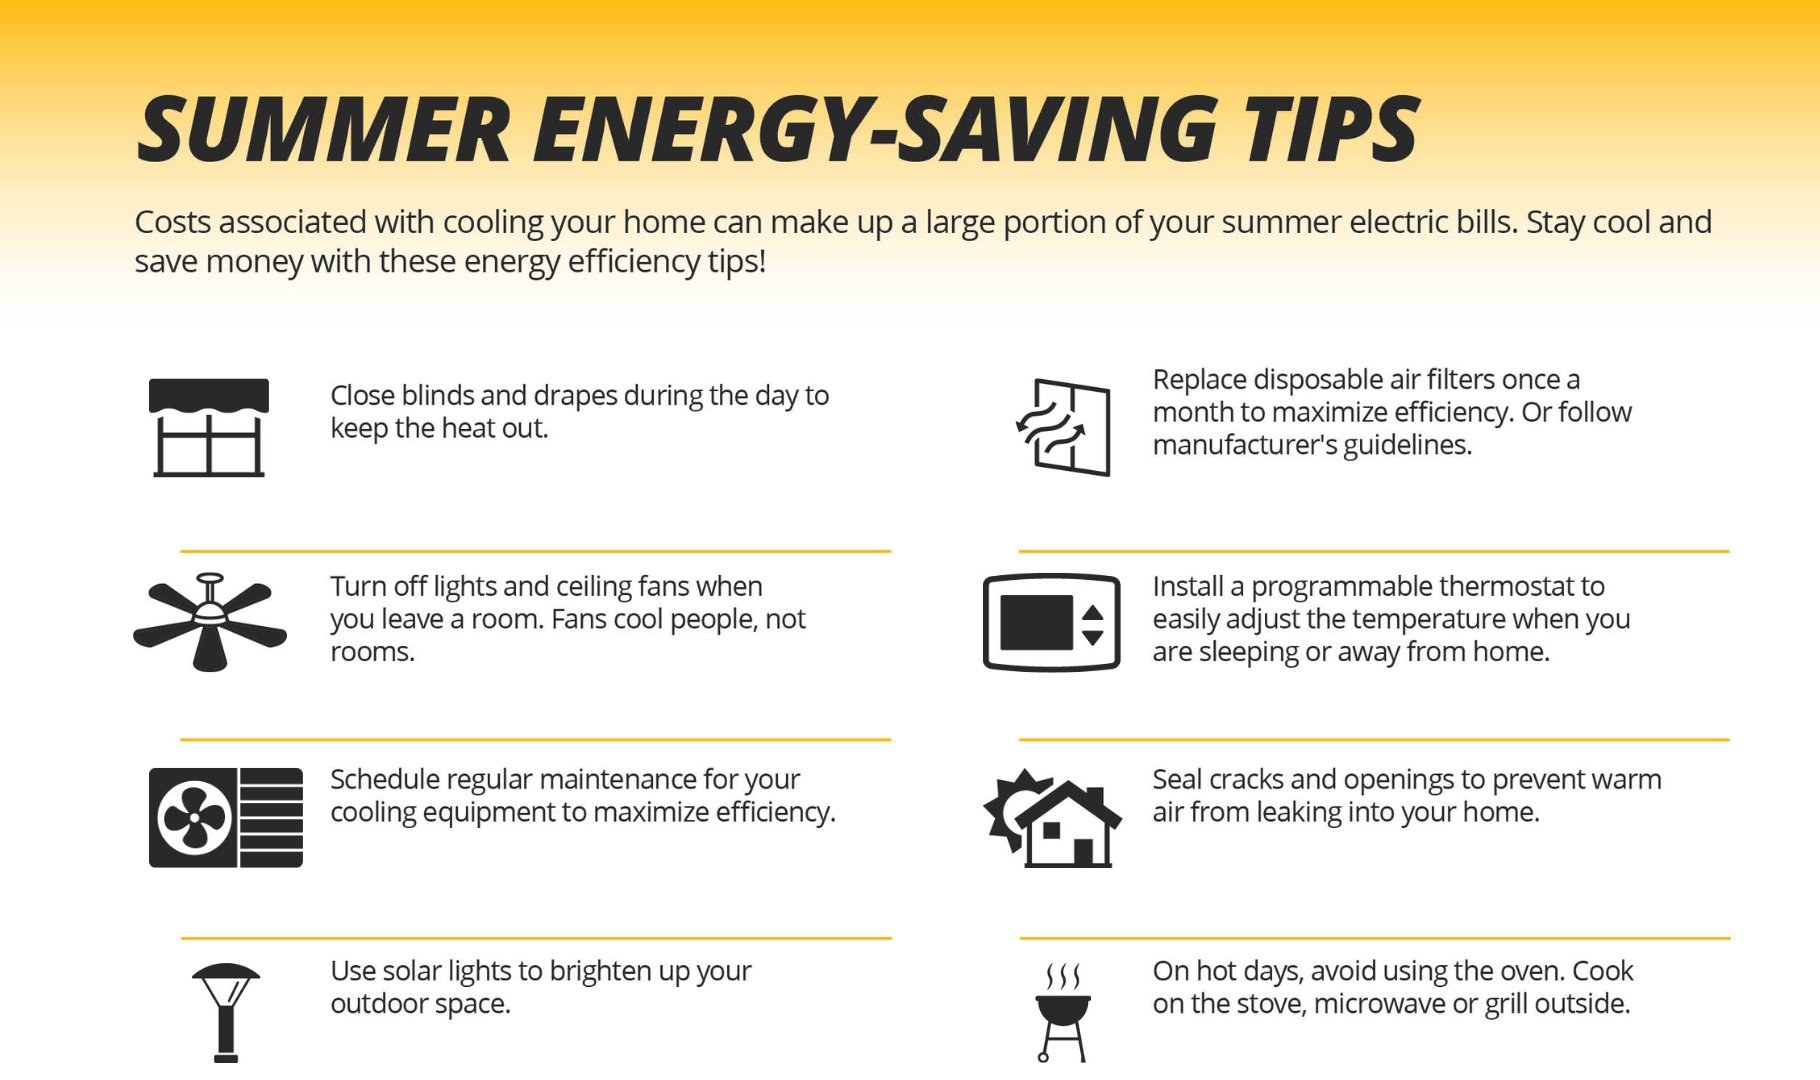 Graphic explaining summer energy-saving tips, which are also written about in the article below the image.